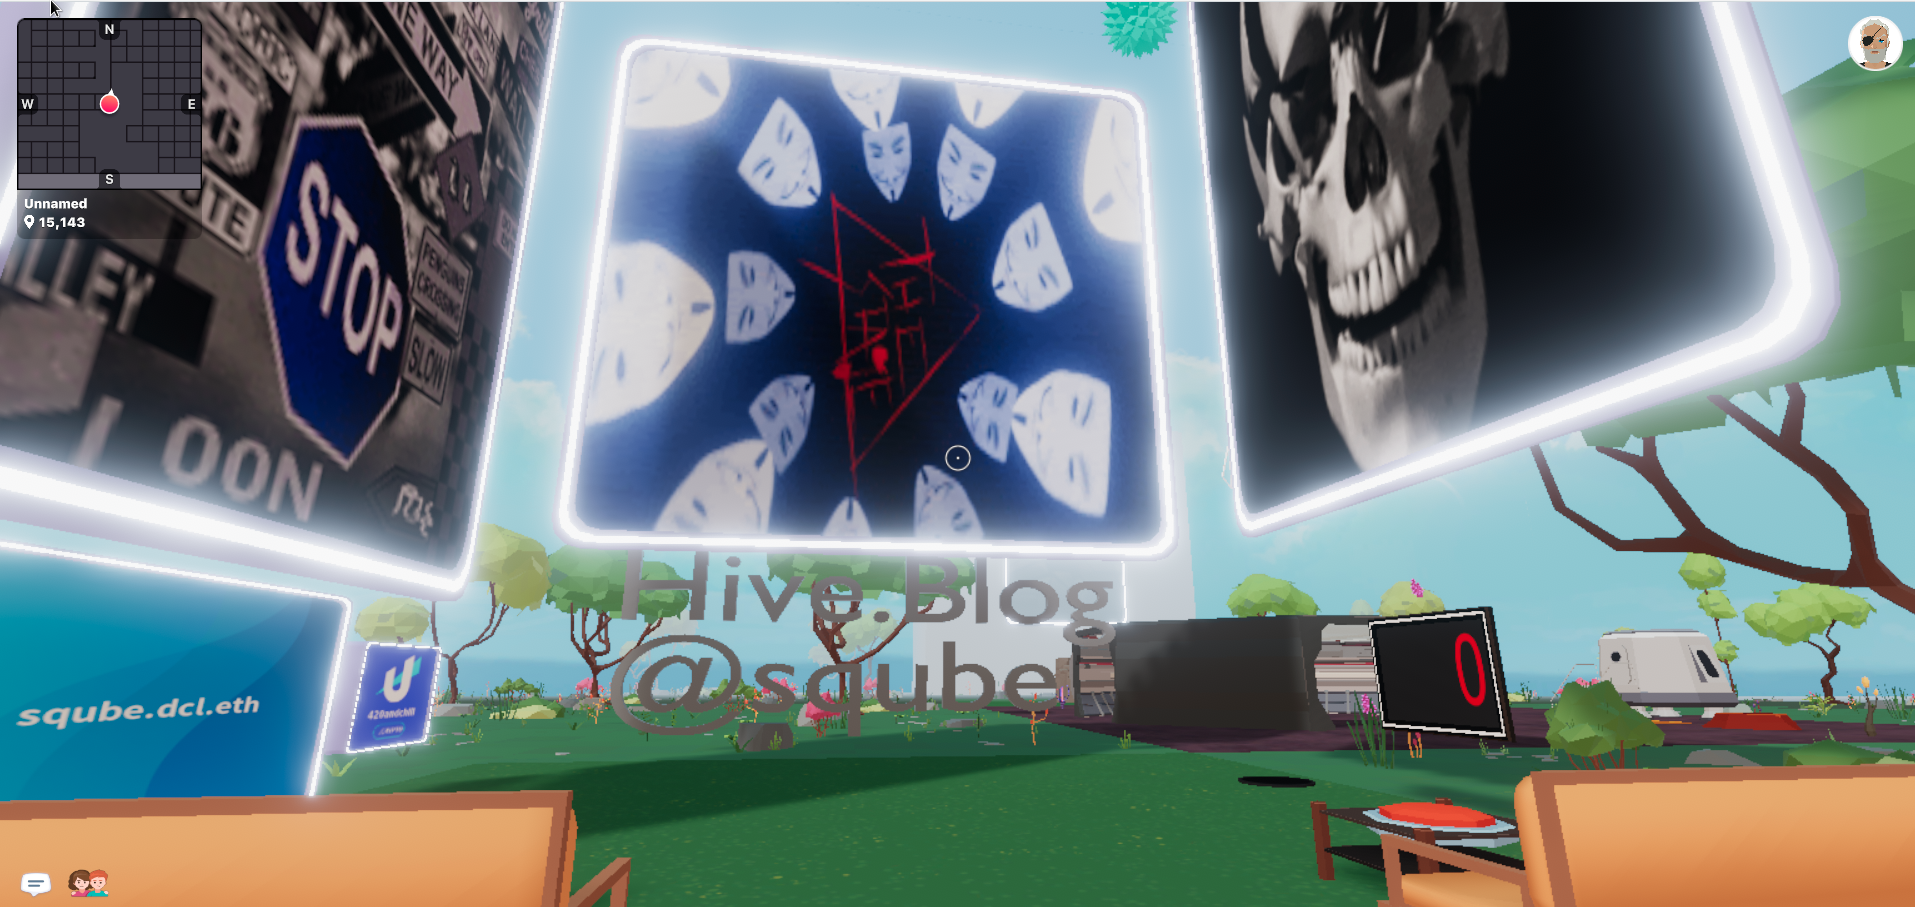 decentraland_sqube_15_144_staged.png